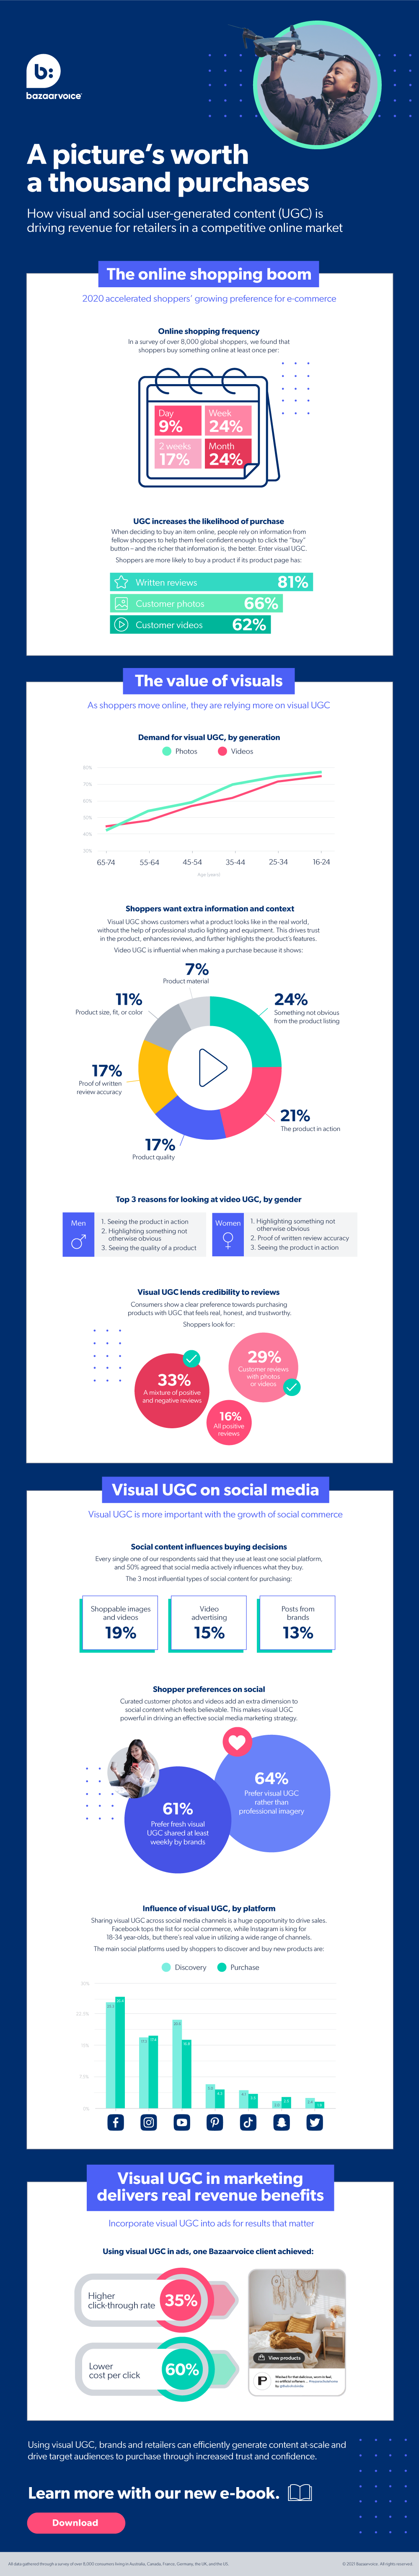 Visual and social content increase online sales